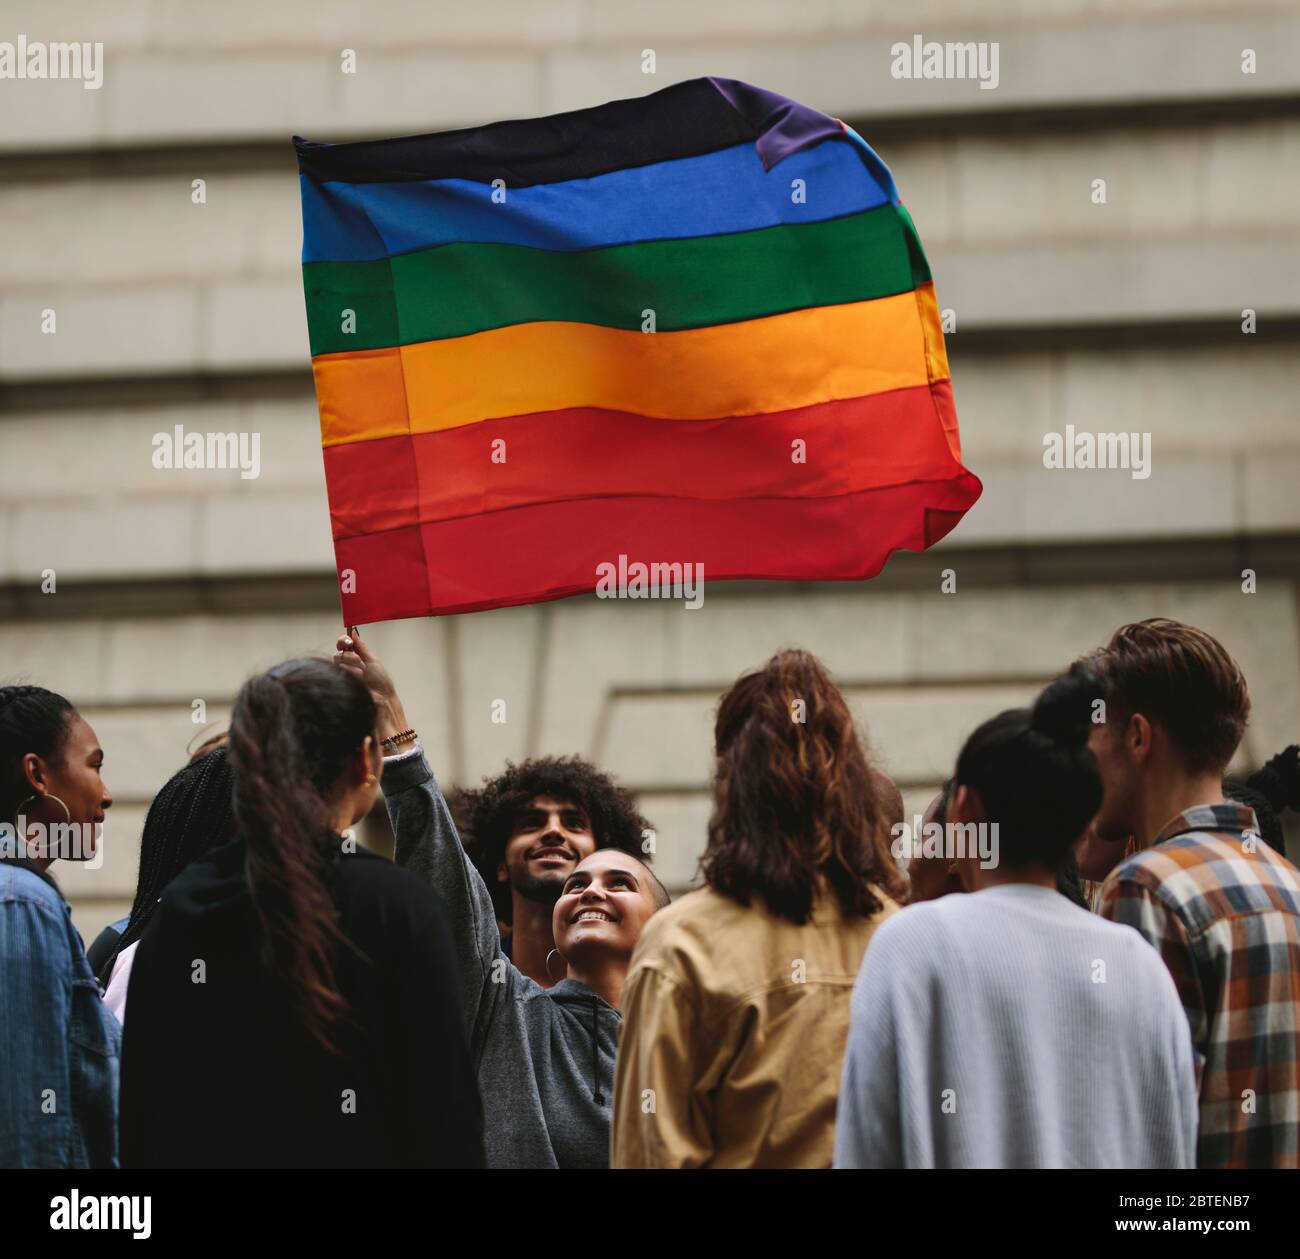 People participate in the annual Pride Parade and celebrations in the city. Young woman waving gay rainbow flag with people standing around. Stock Photo